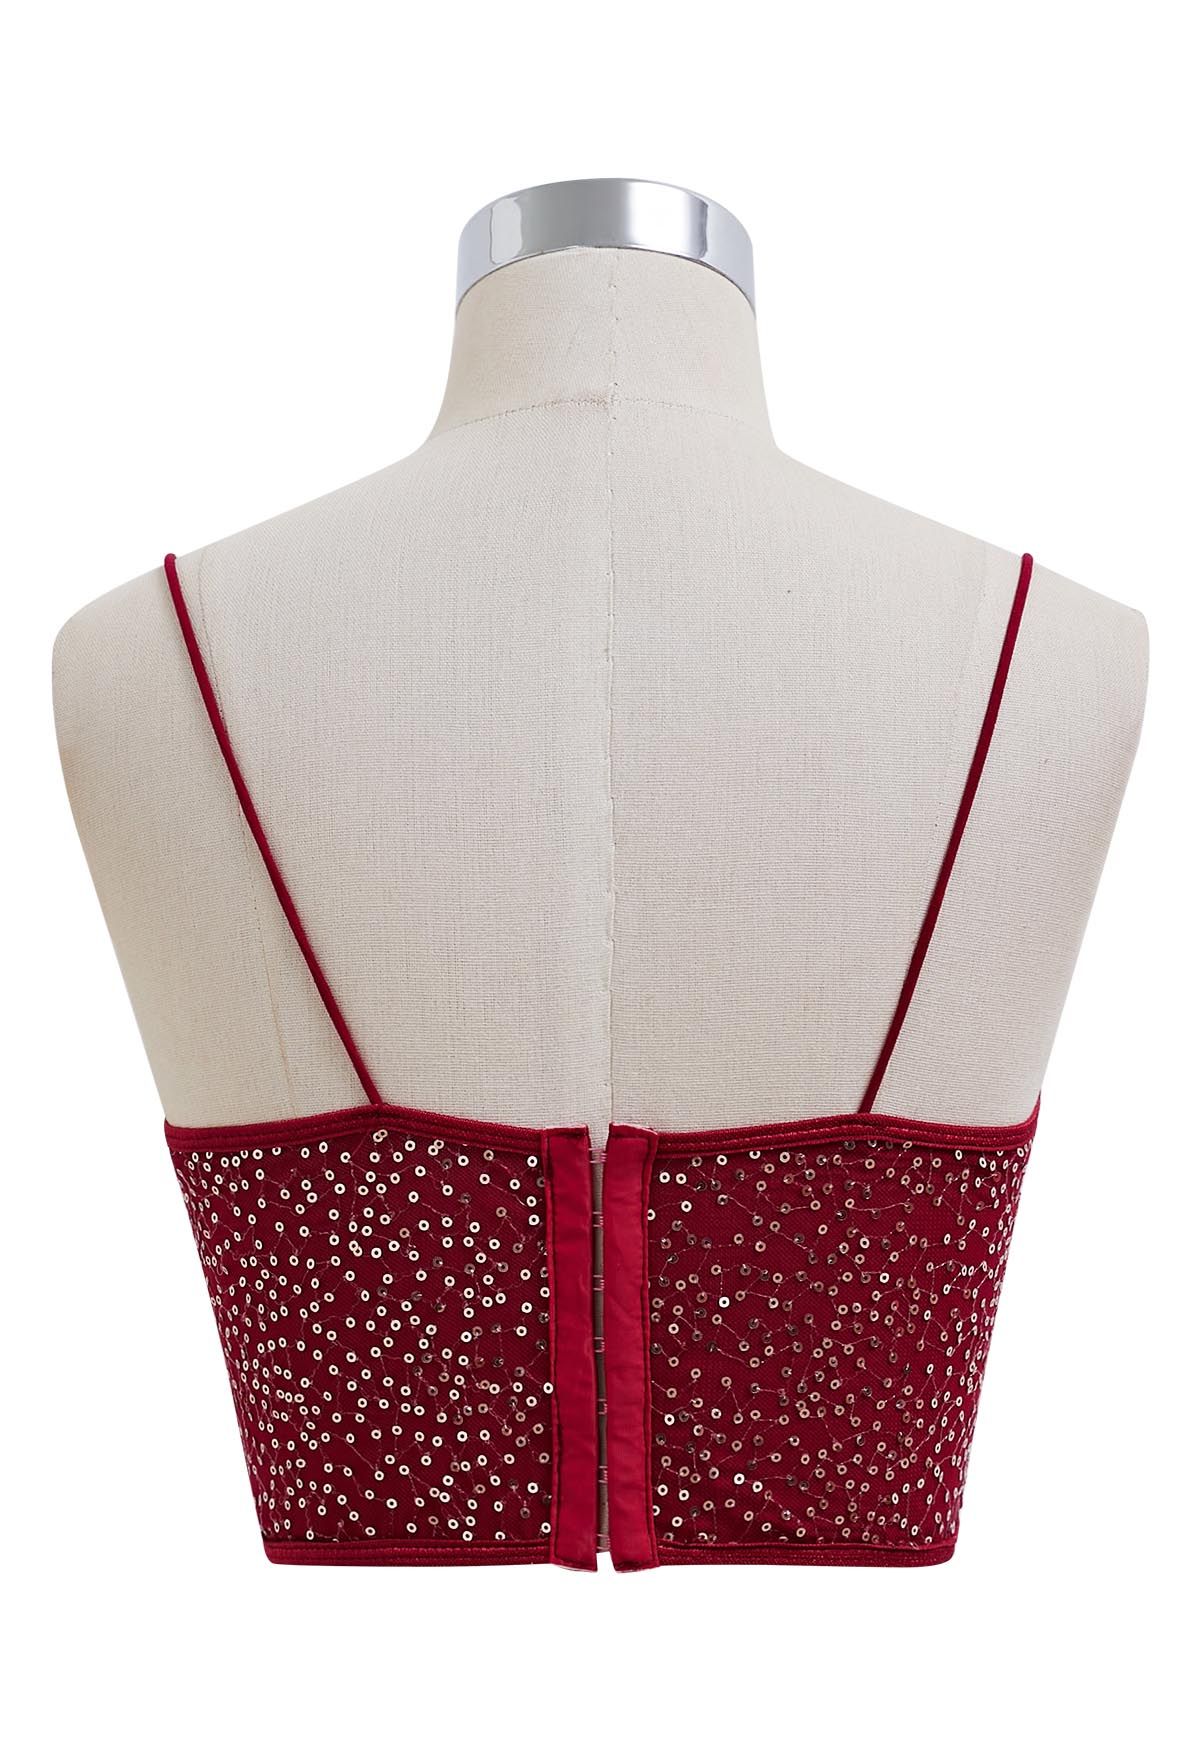 Sequin Embroidered Corset Bustier Top in Burgundy - Retro, Indie and Unique  Fashion